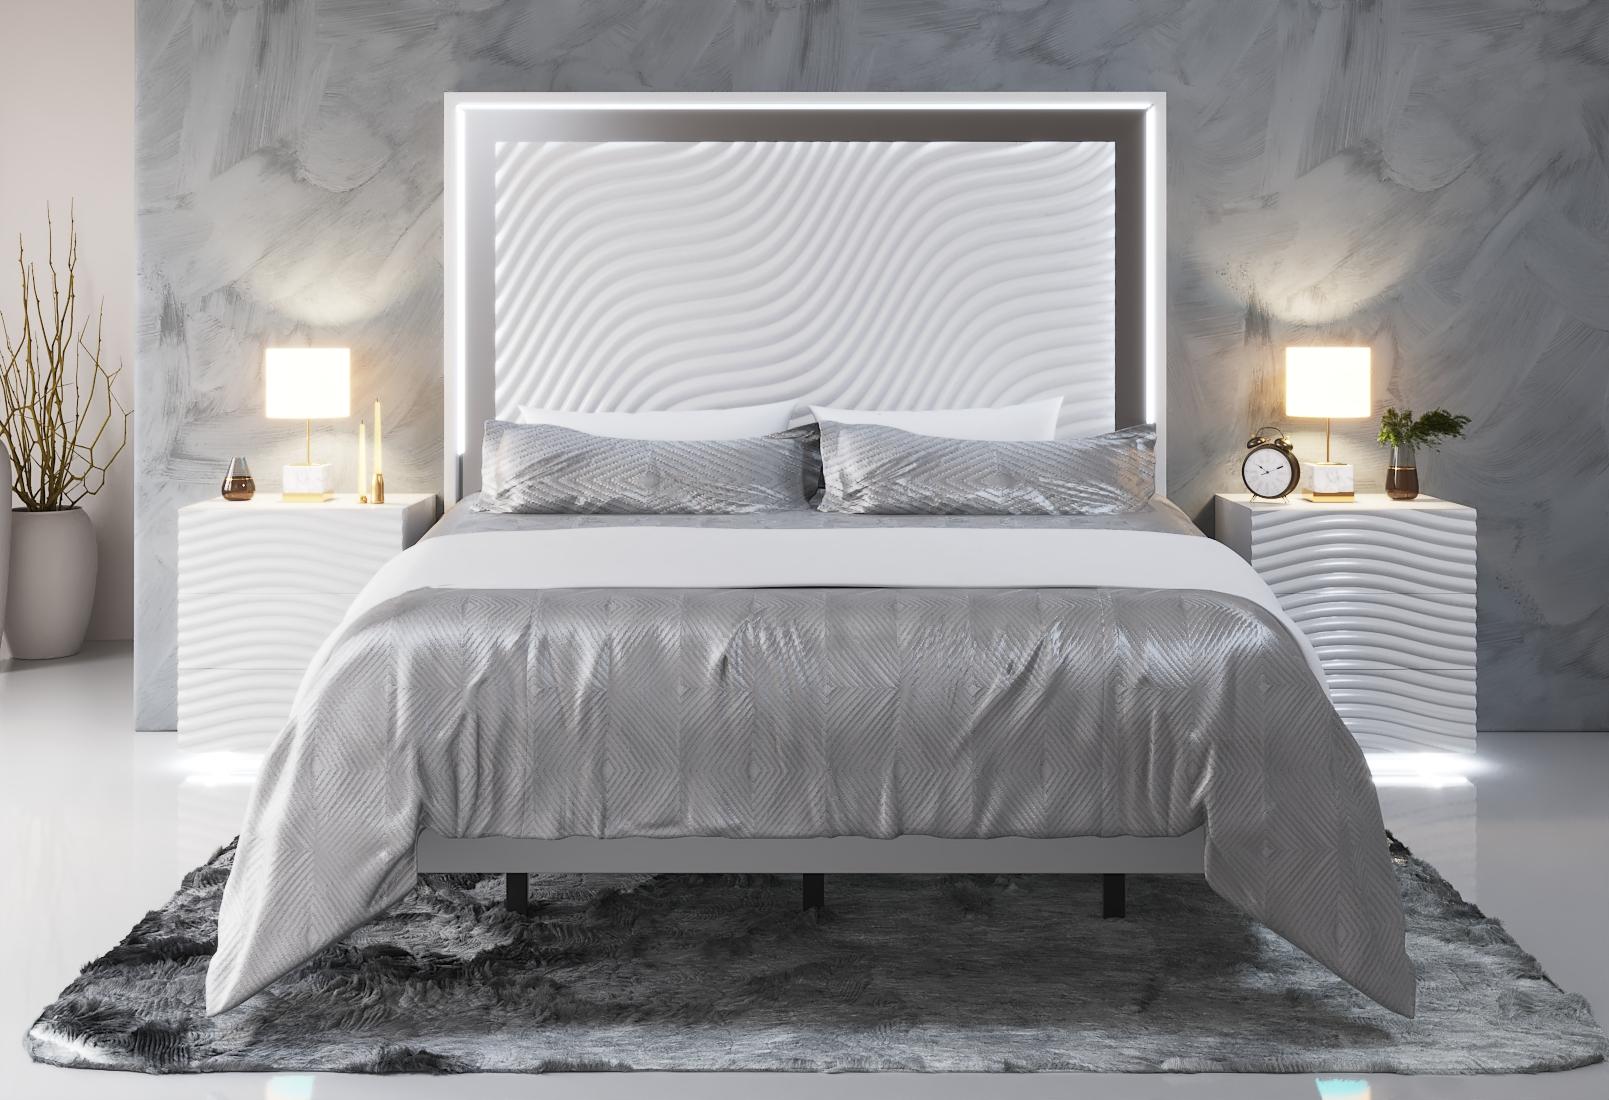 

    
Glam Shiny White King Bedroom Set 6 WAVE ESF Contemporary Modern MADE IN SPAIN
